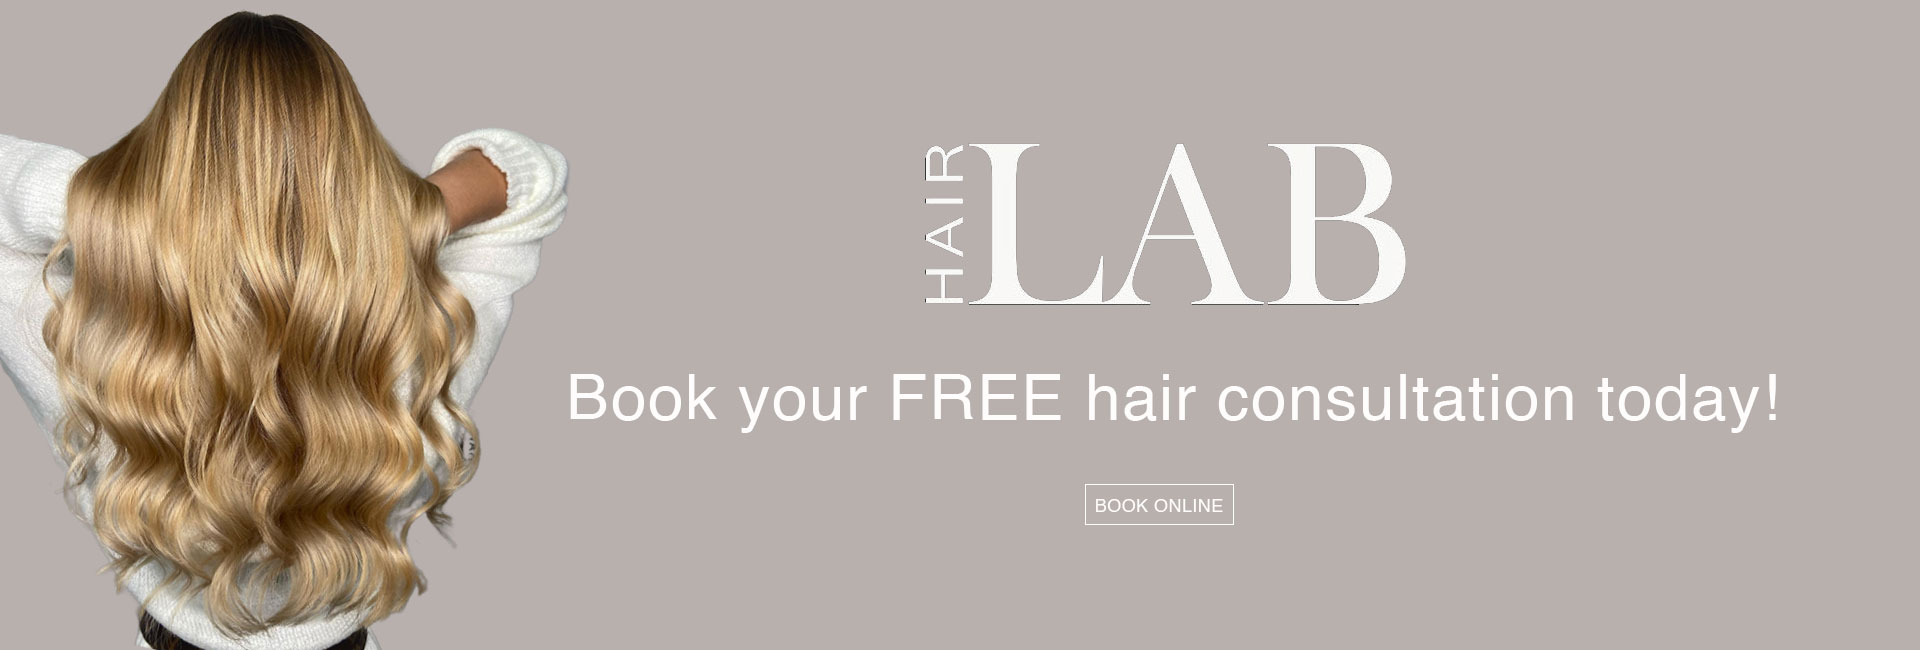 VISIT THE HAIRDRESSING EXPERTS AT HAIR LAB HAIRDRESSERS IN BASINGSTOKE